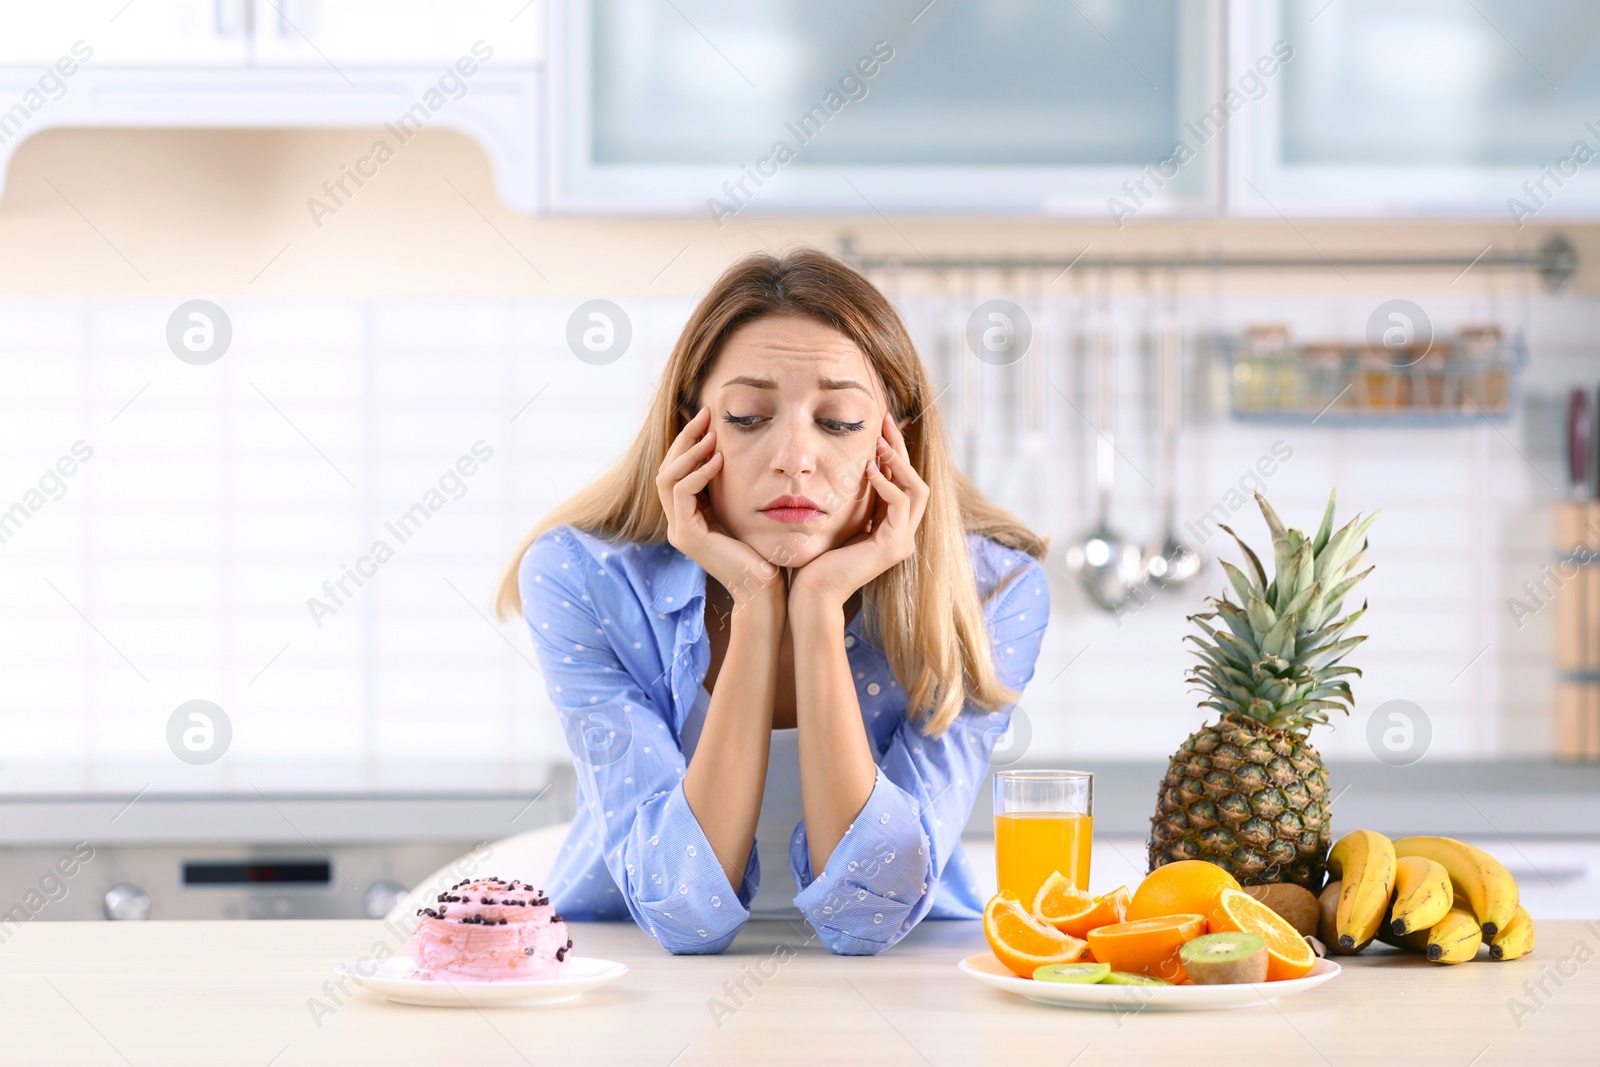 Photo of Woman choosing between dessert and fruits at table in kitchen. Healthy diet